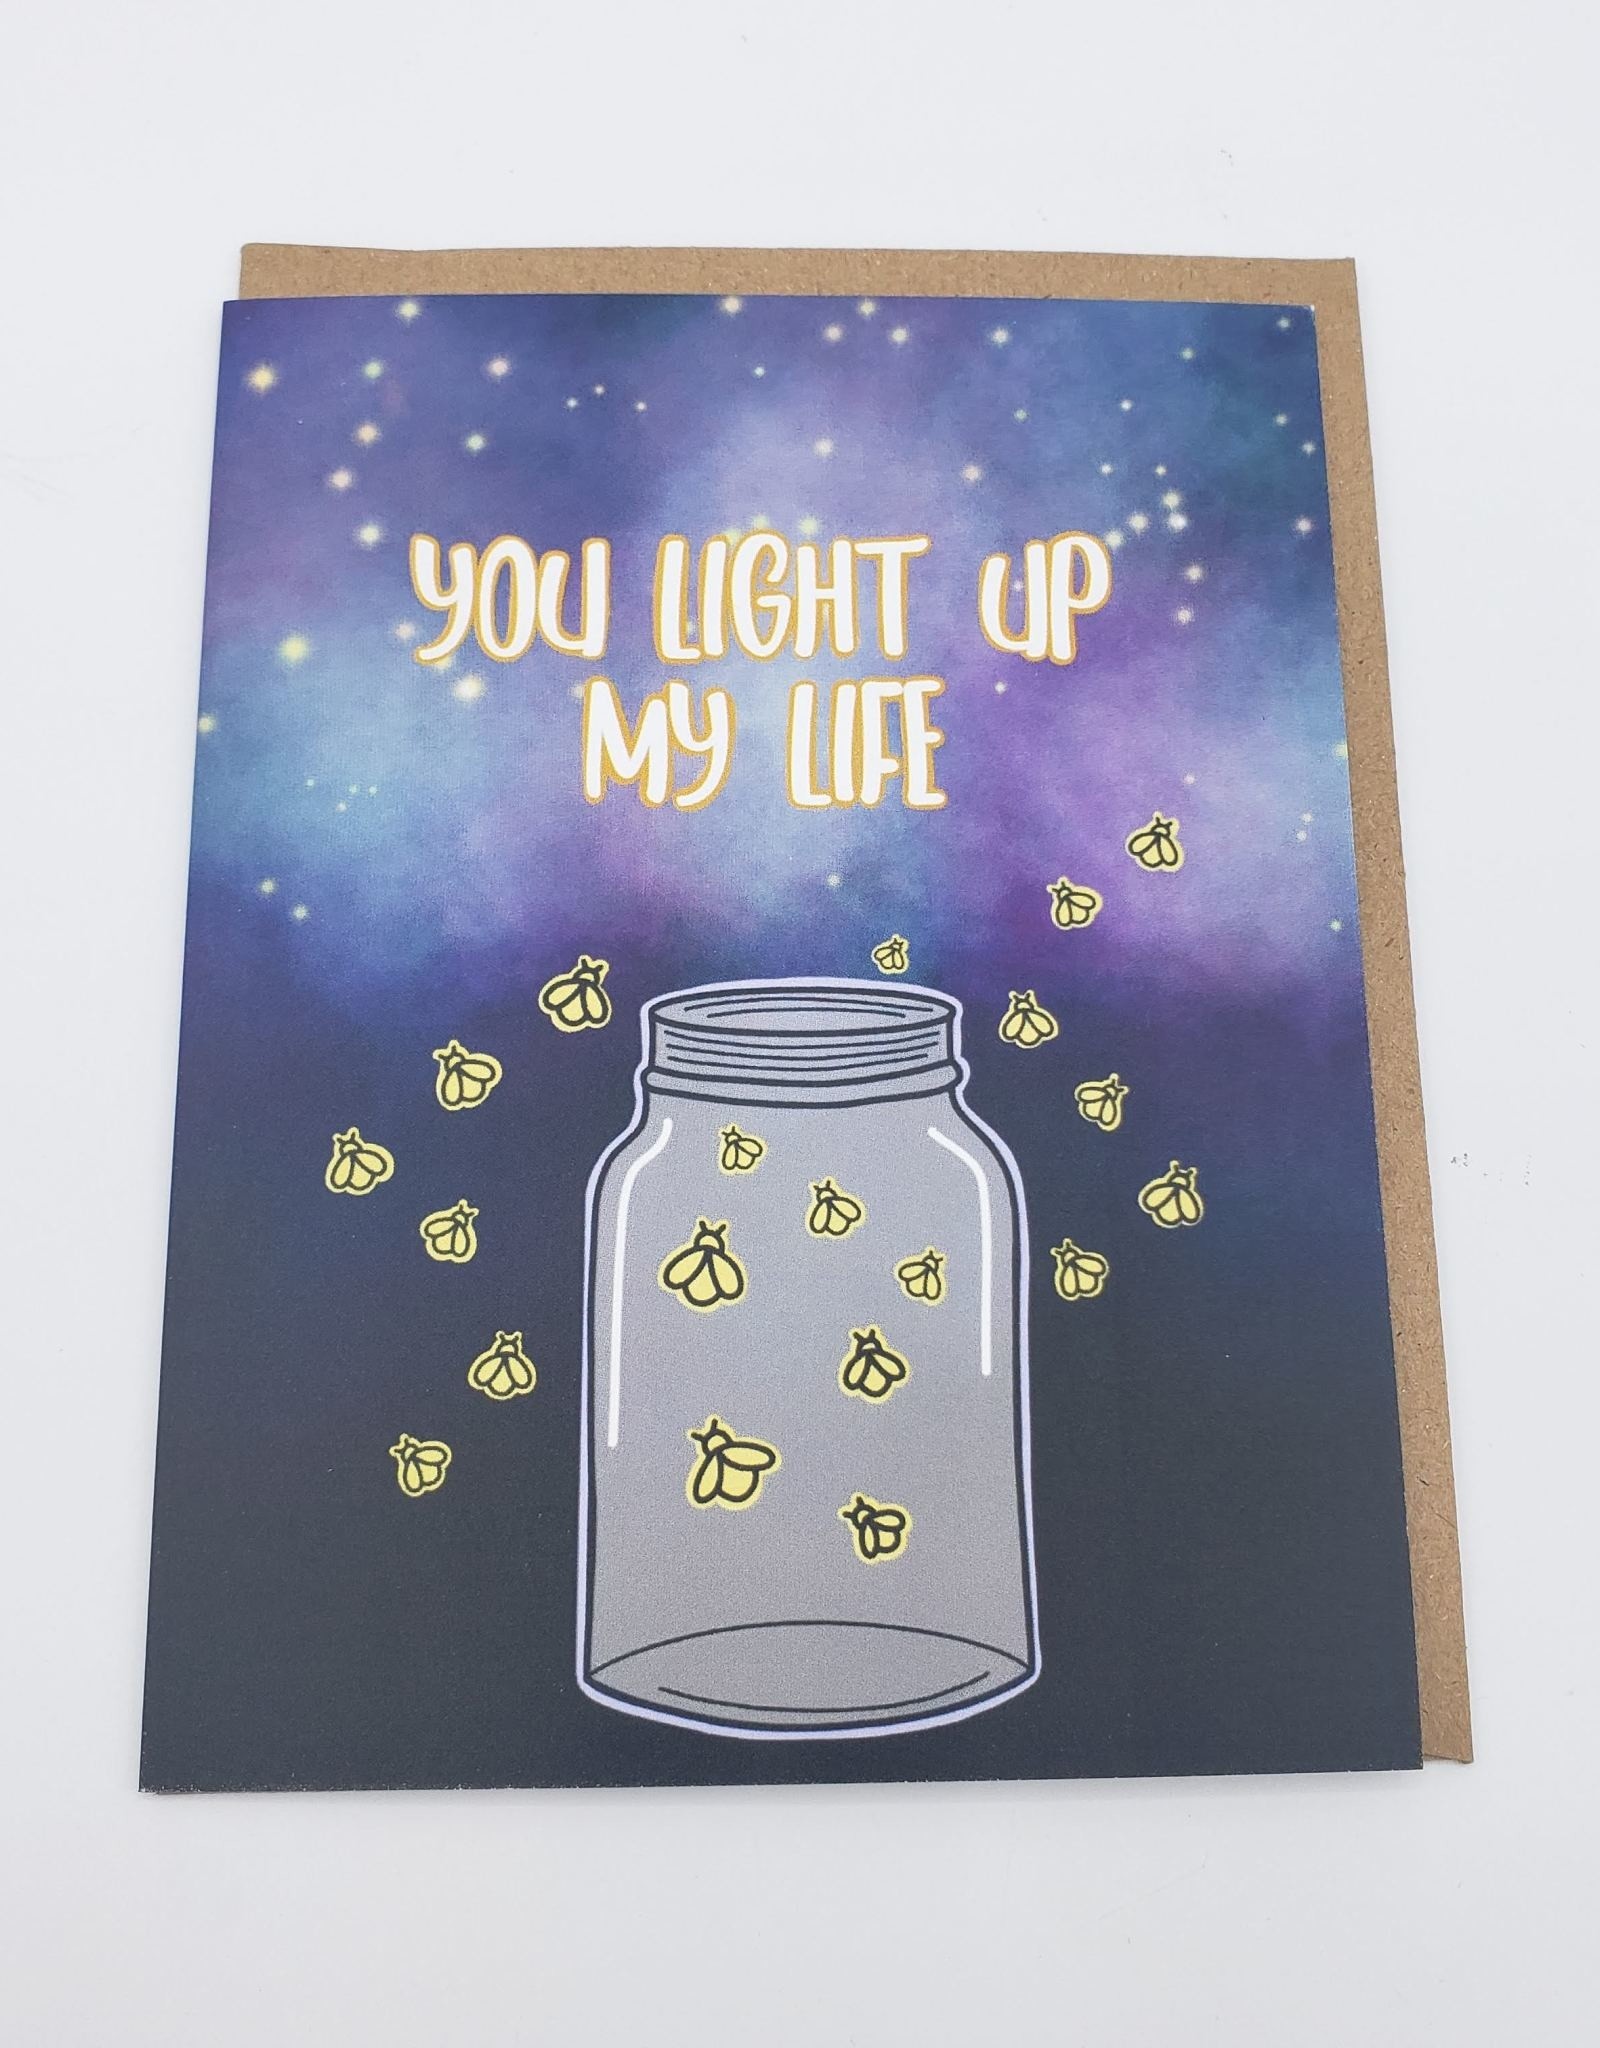 "You Light Up my Life" Firefly Greeting Card